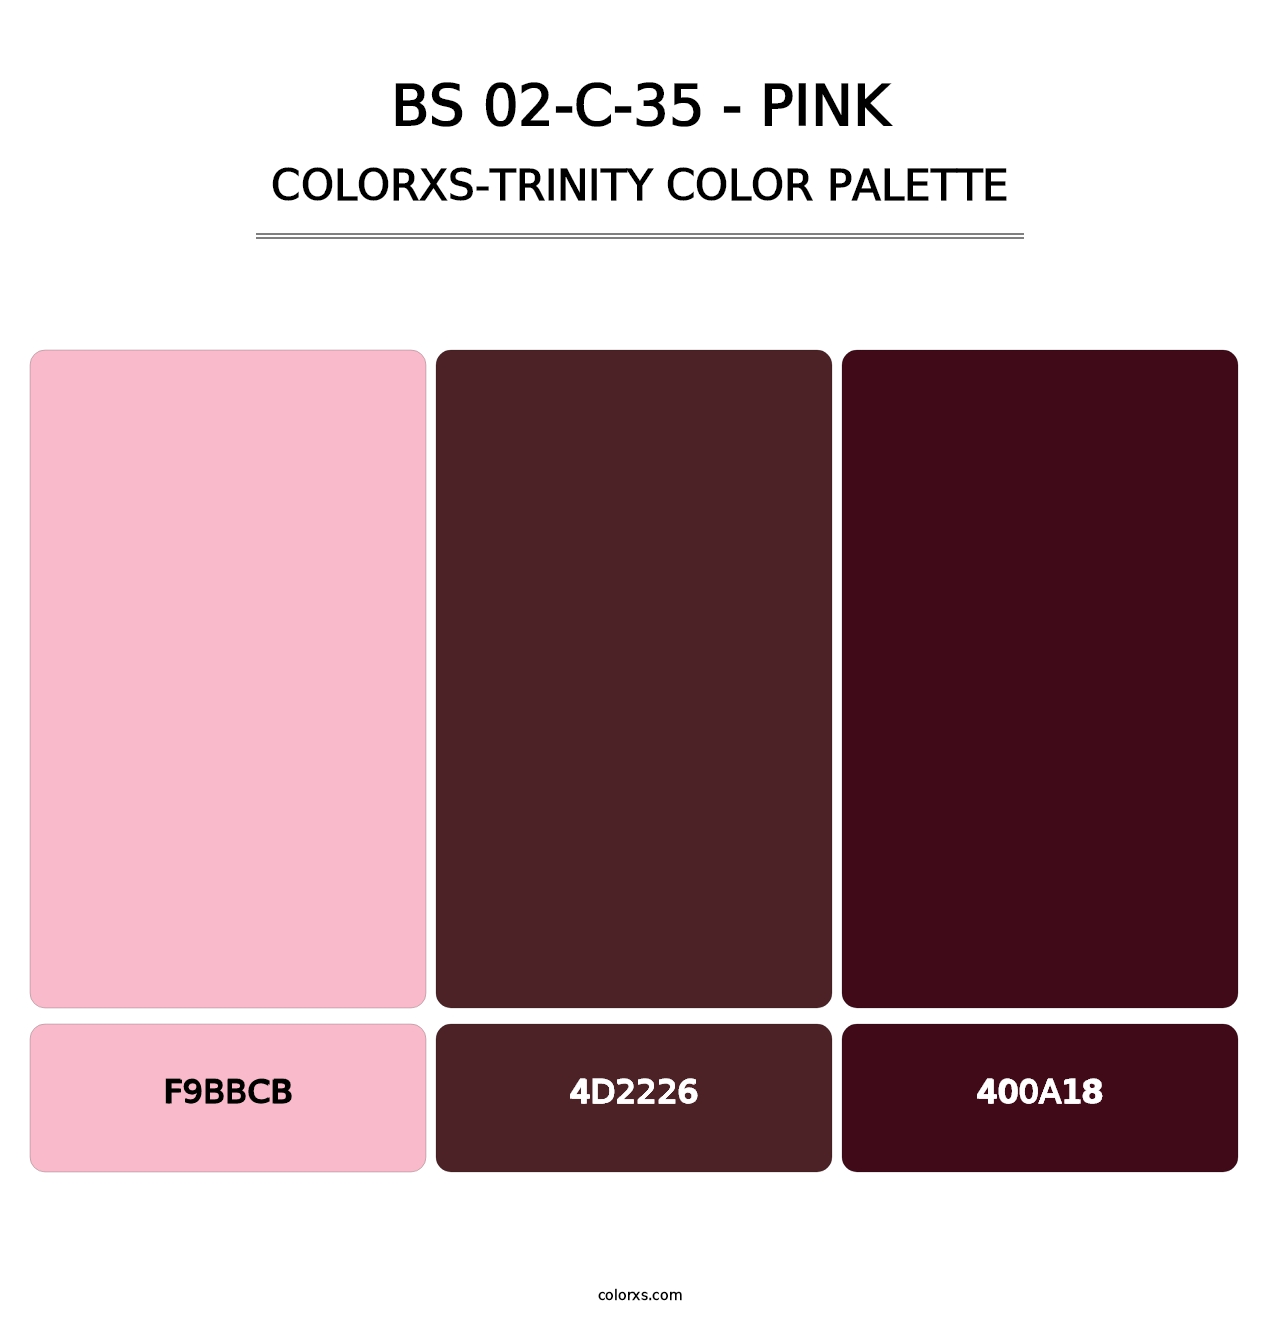 BS 02-C-35 - Pink - Colorxs Trinity Palette